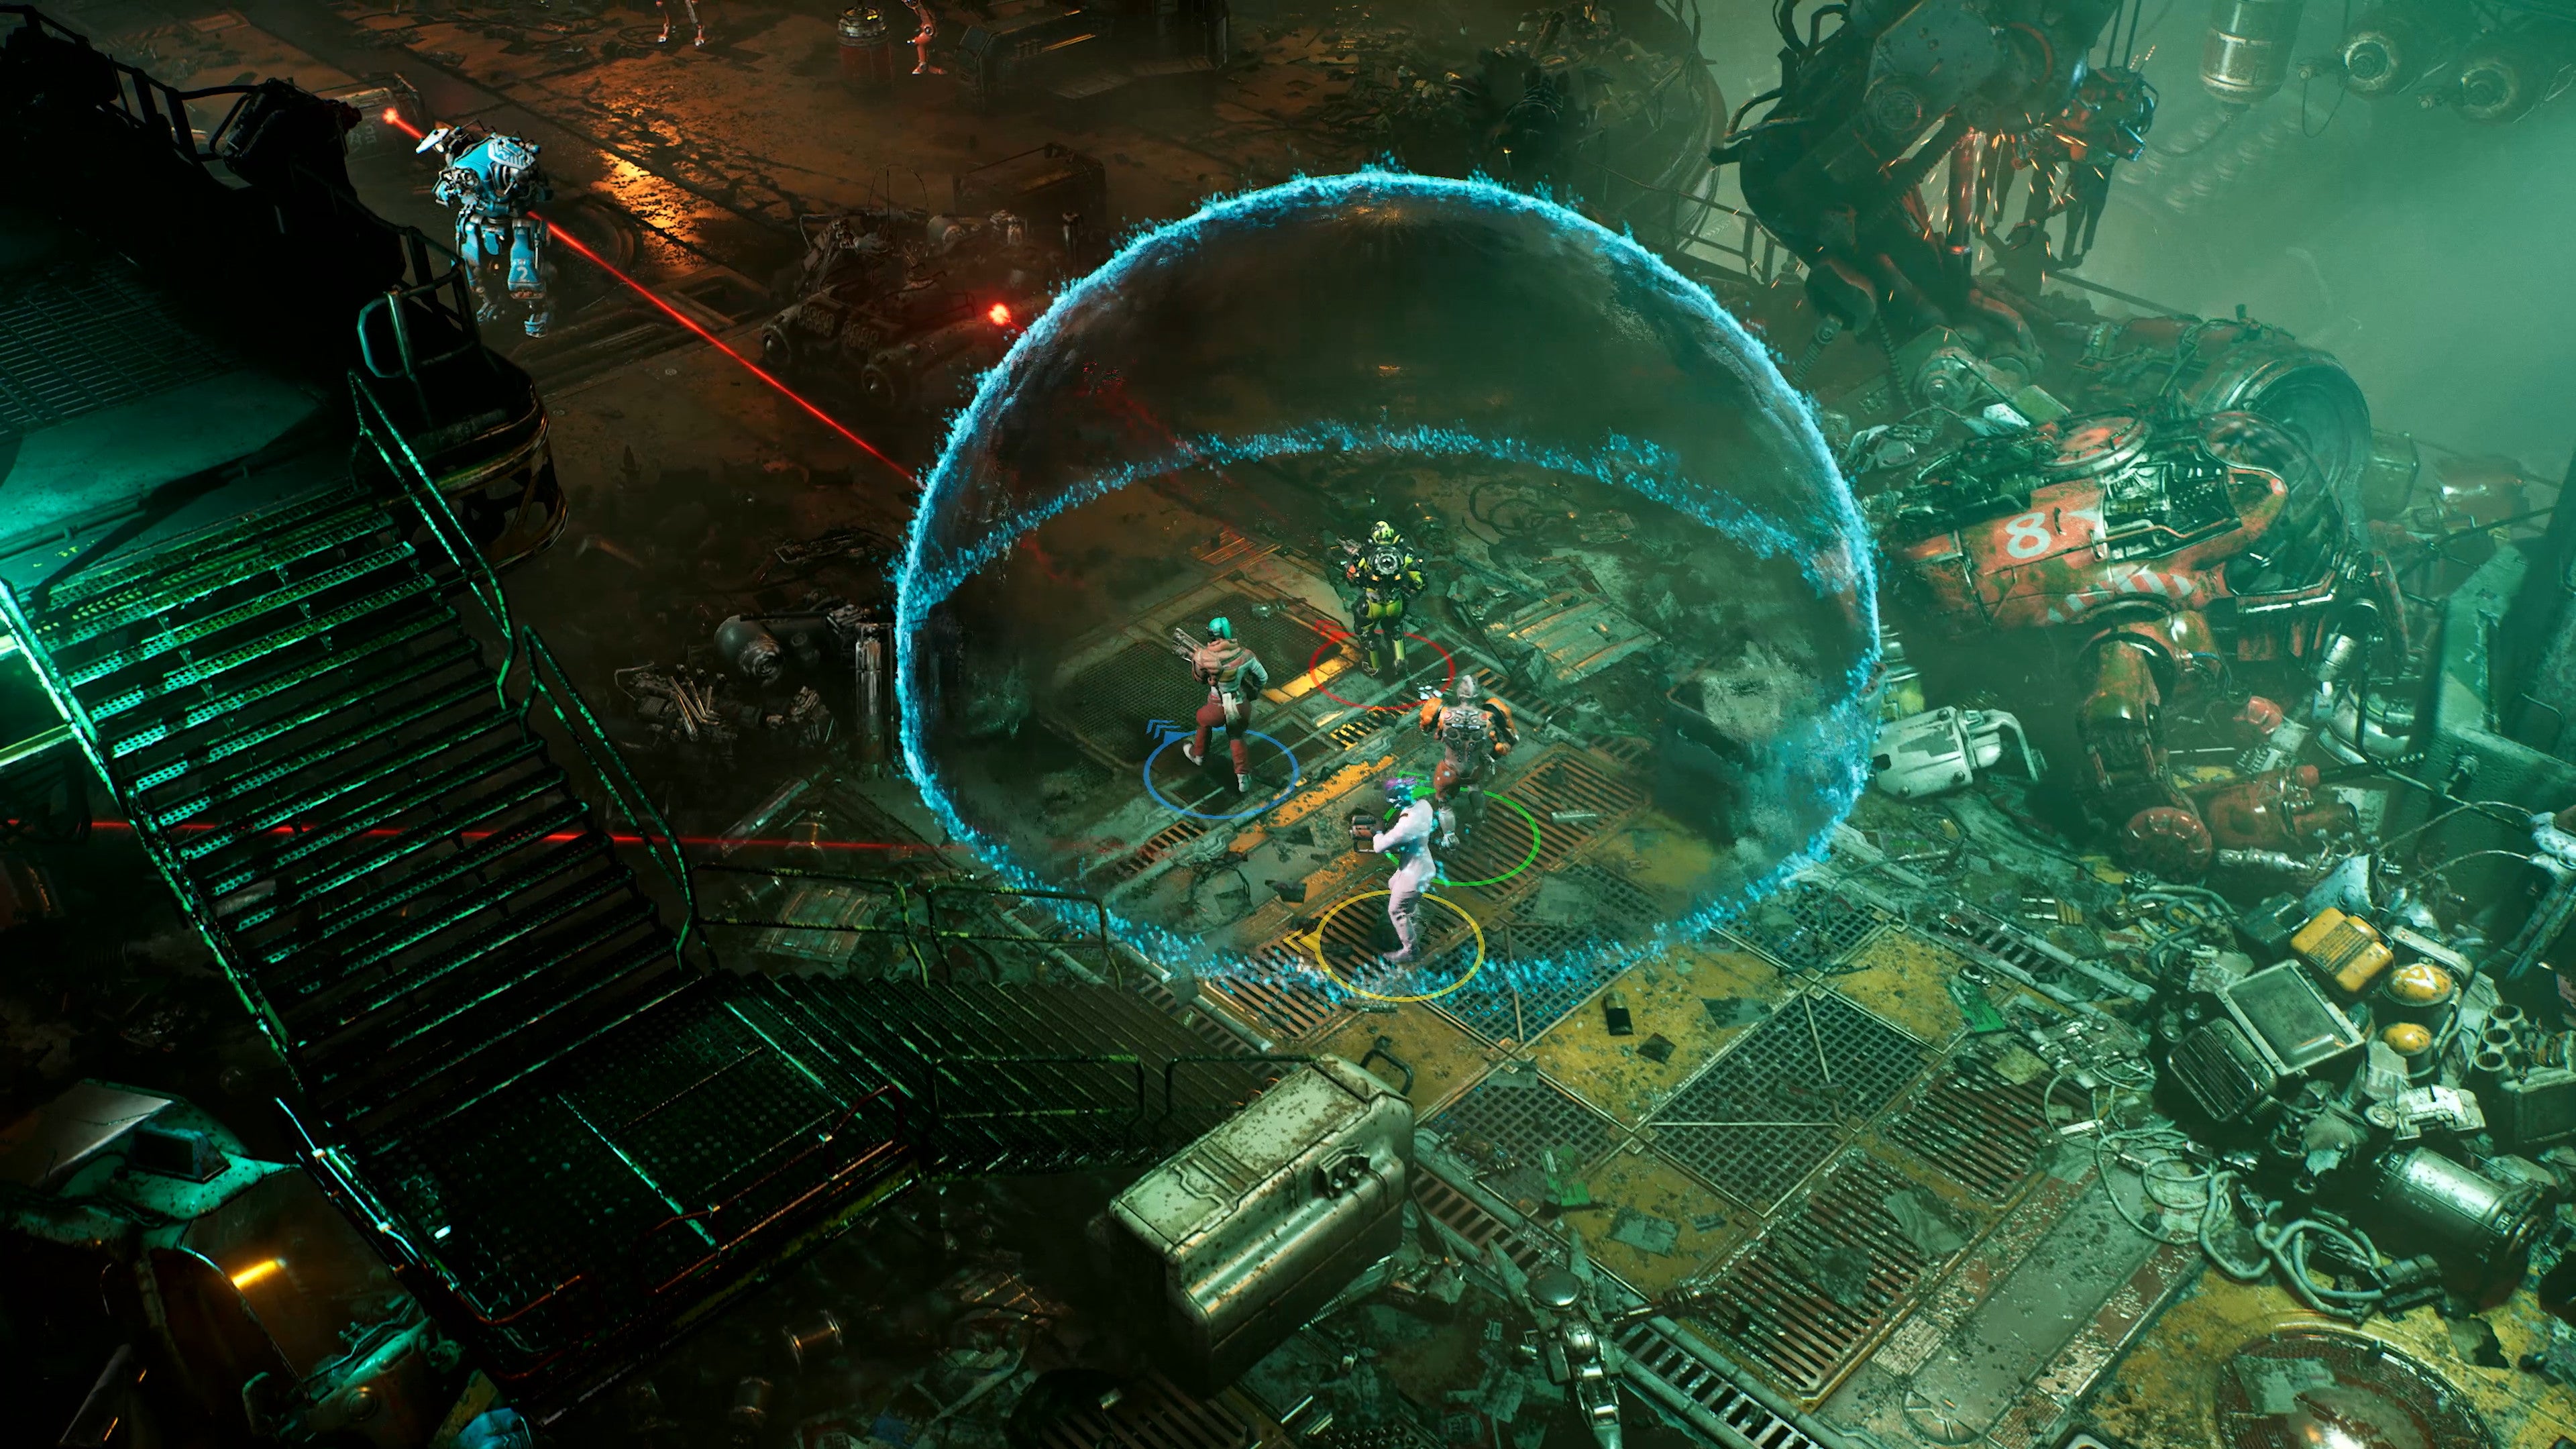 The Ascent - Four player characters stand inside a blue shield dome while aiming at a mechanical enemy while standing in a cluttered, metal terrace full of mechanical scrap heaps.